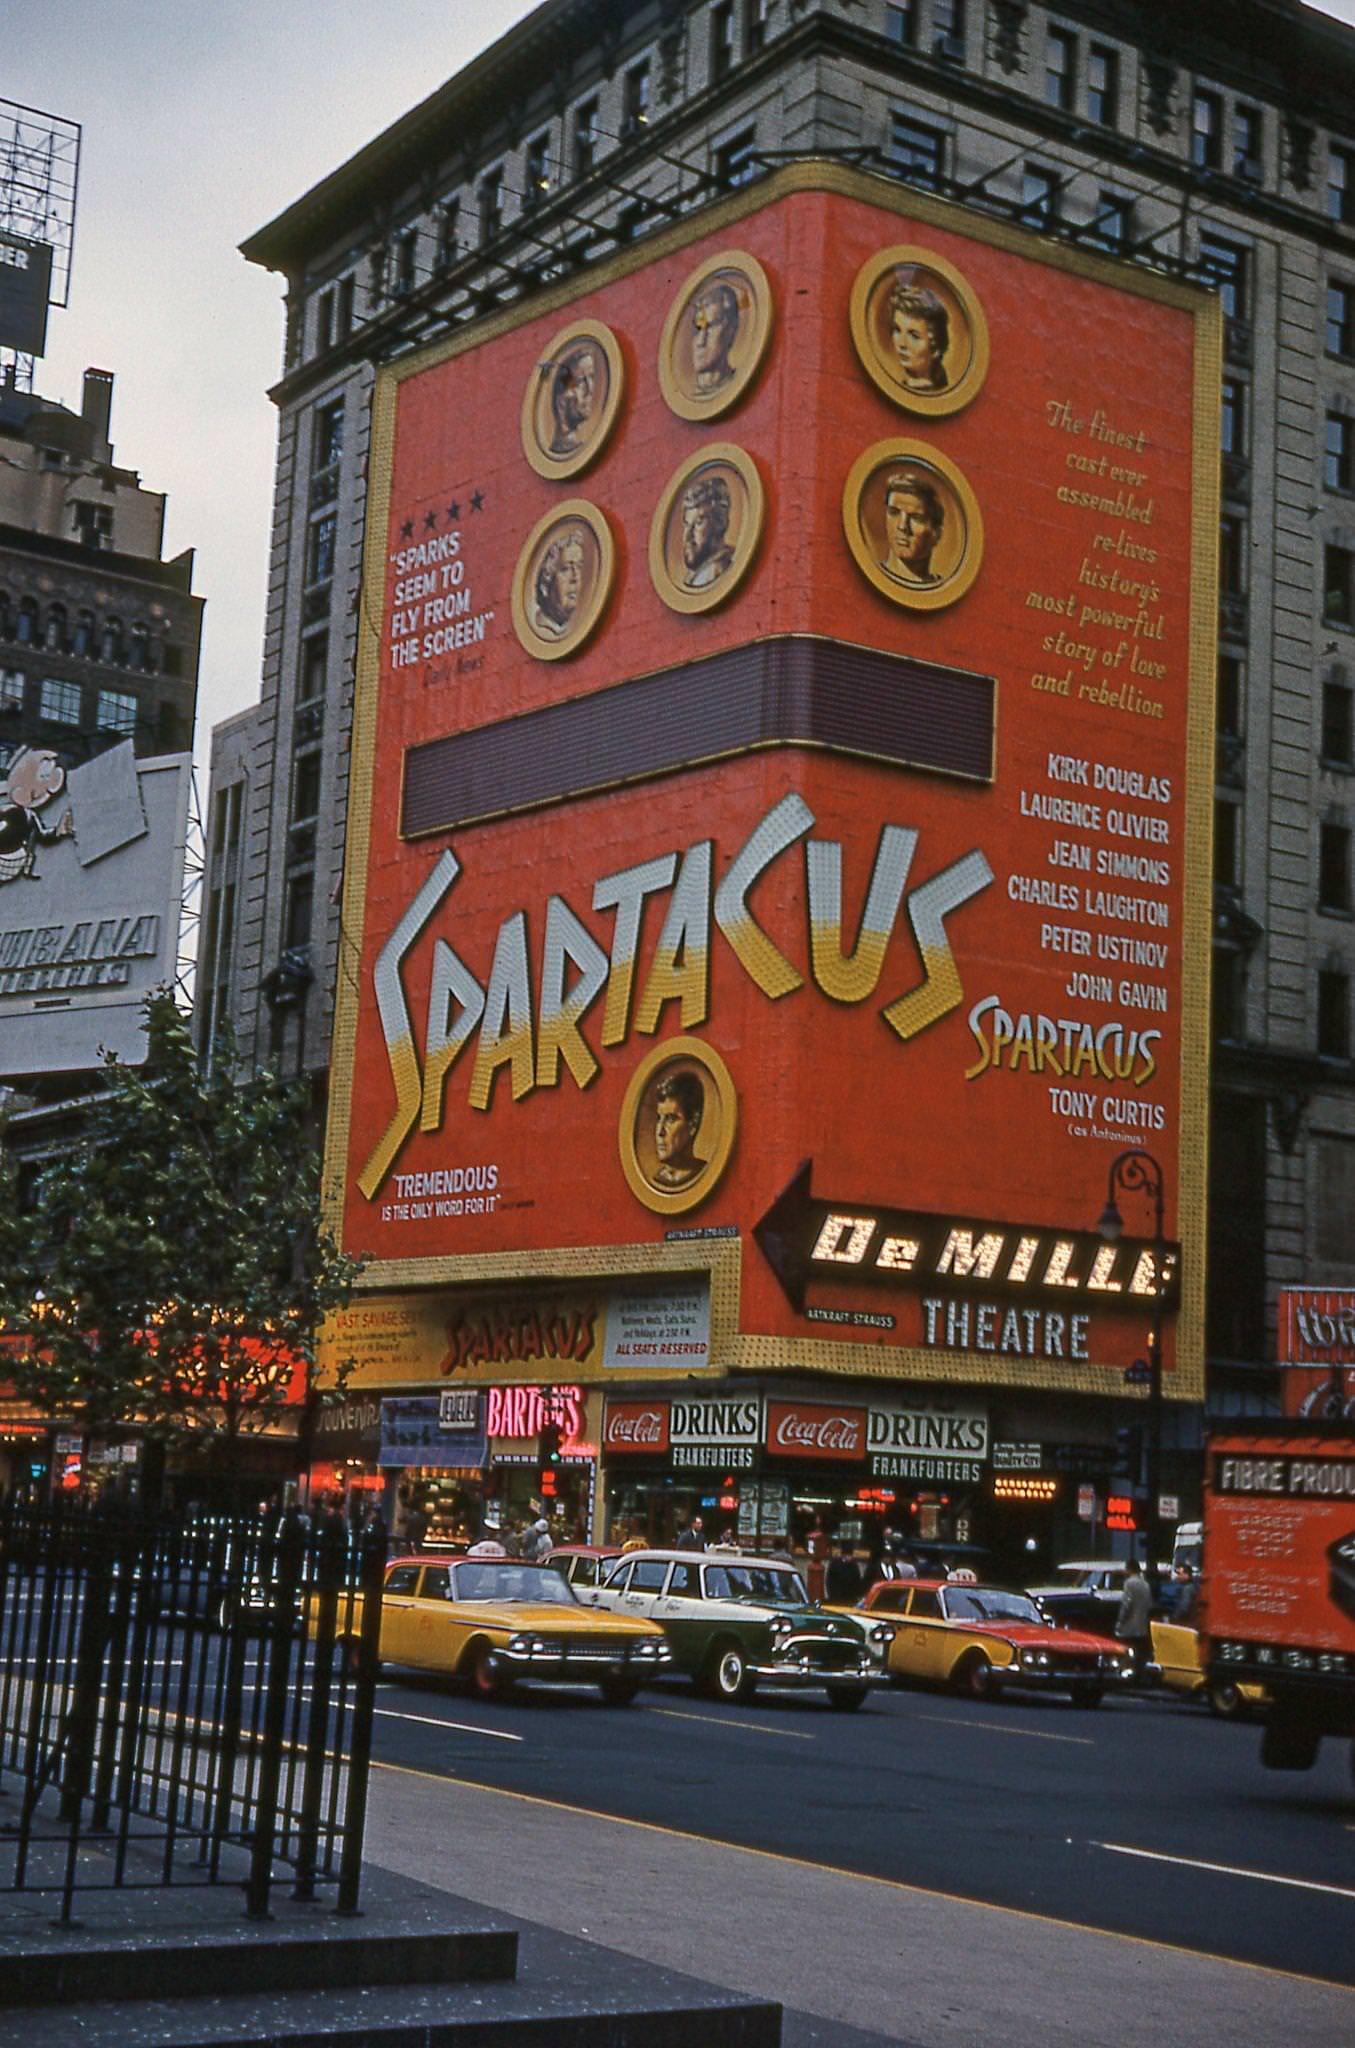 Huge Billboard For The Movie Spartacus At The Demille Theatre In Times Square, Manhattan, 1960